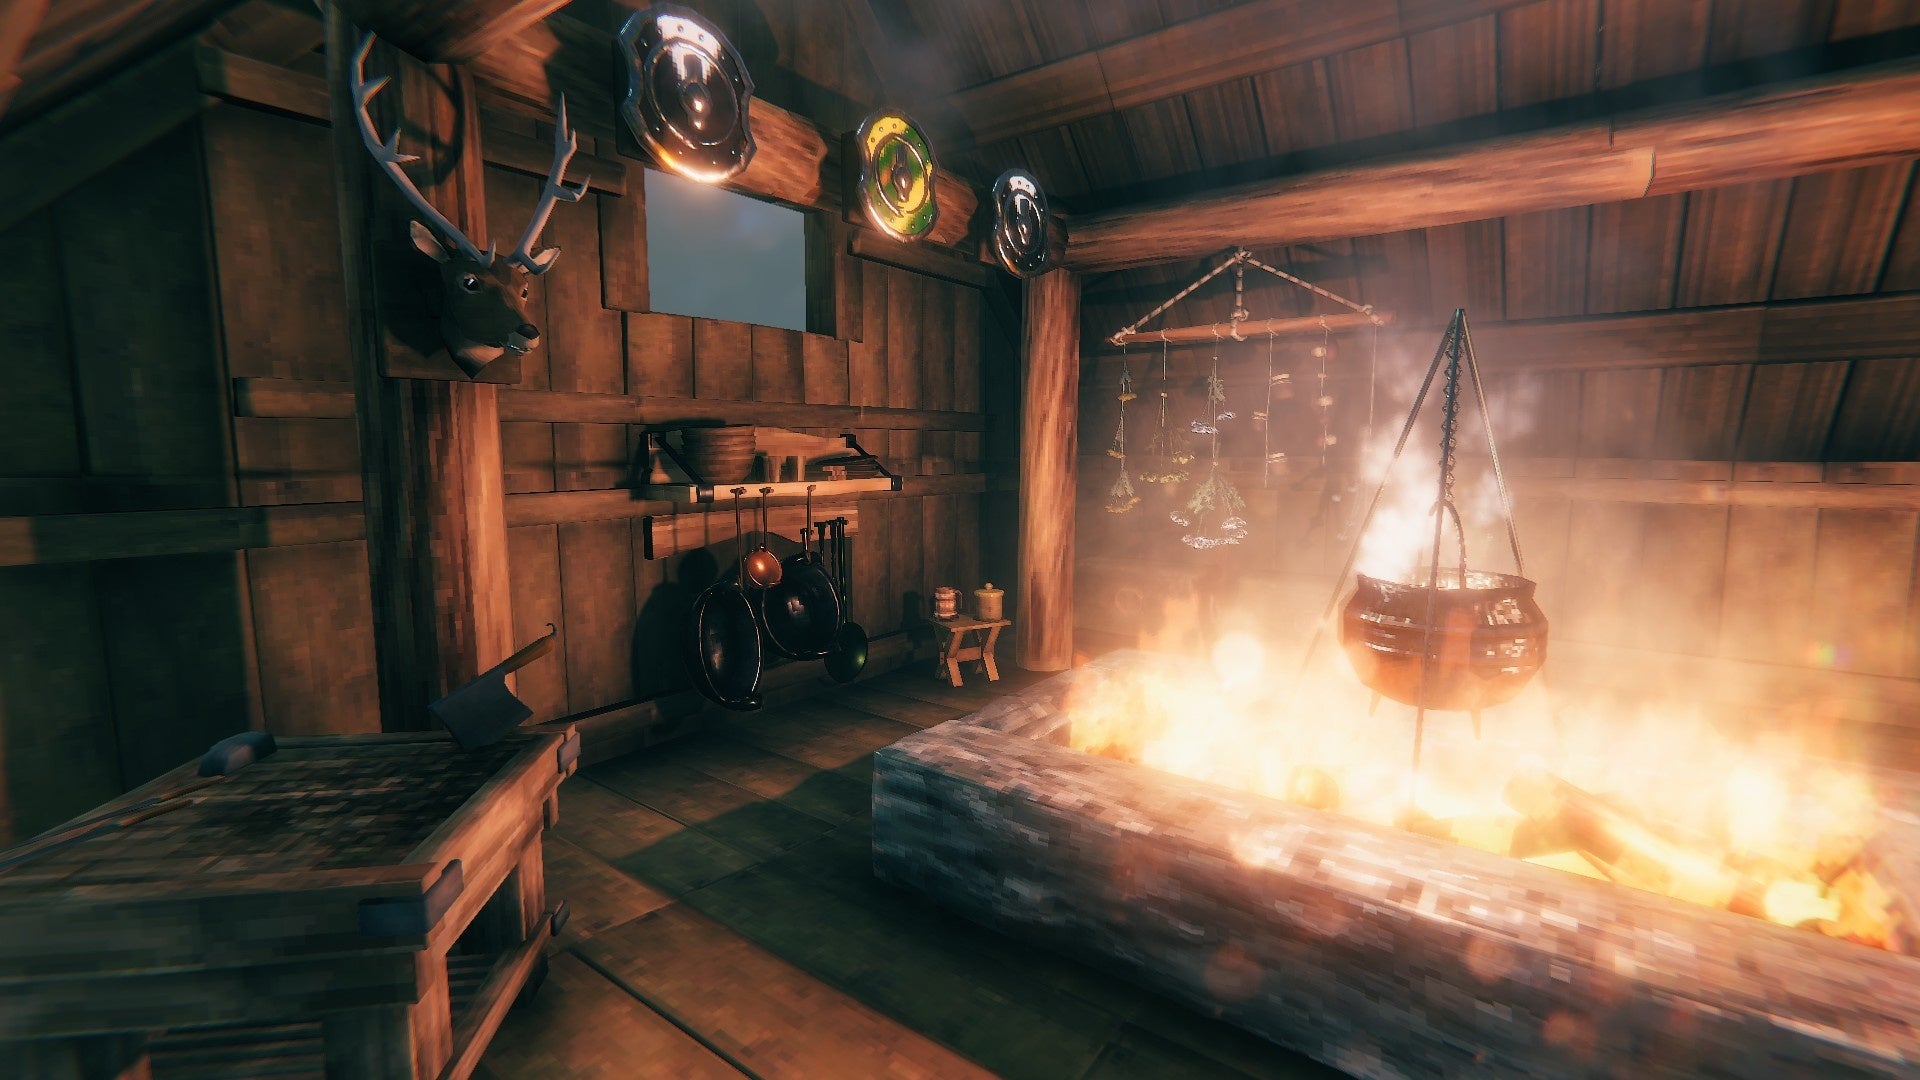 A screenshot of Valheim's Hearth & Home update, showing the inside of a cabin featuring new cooking station items.